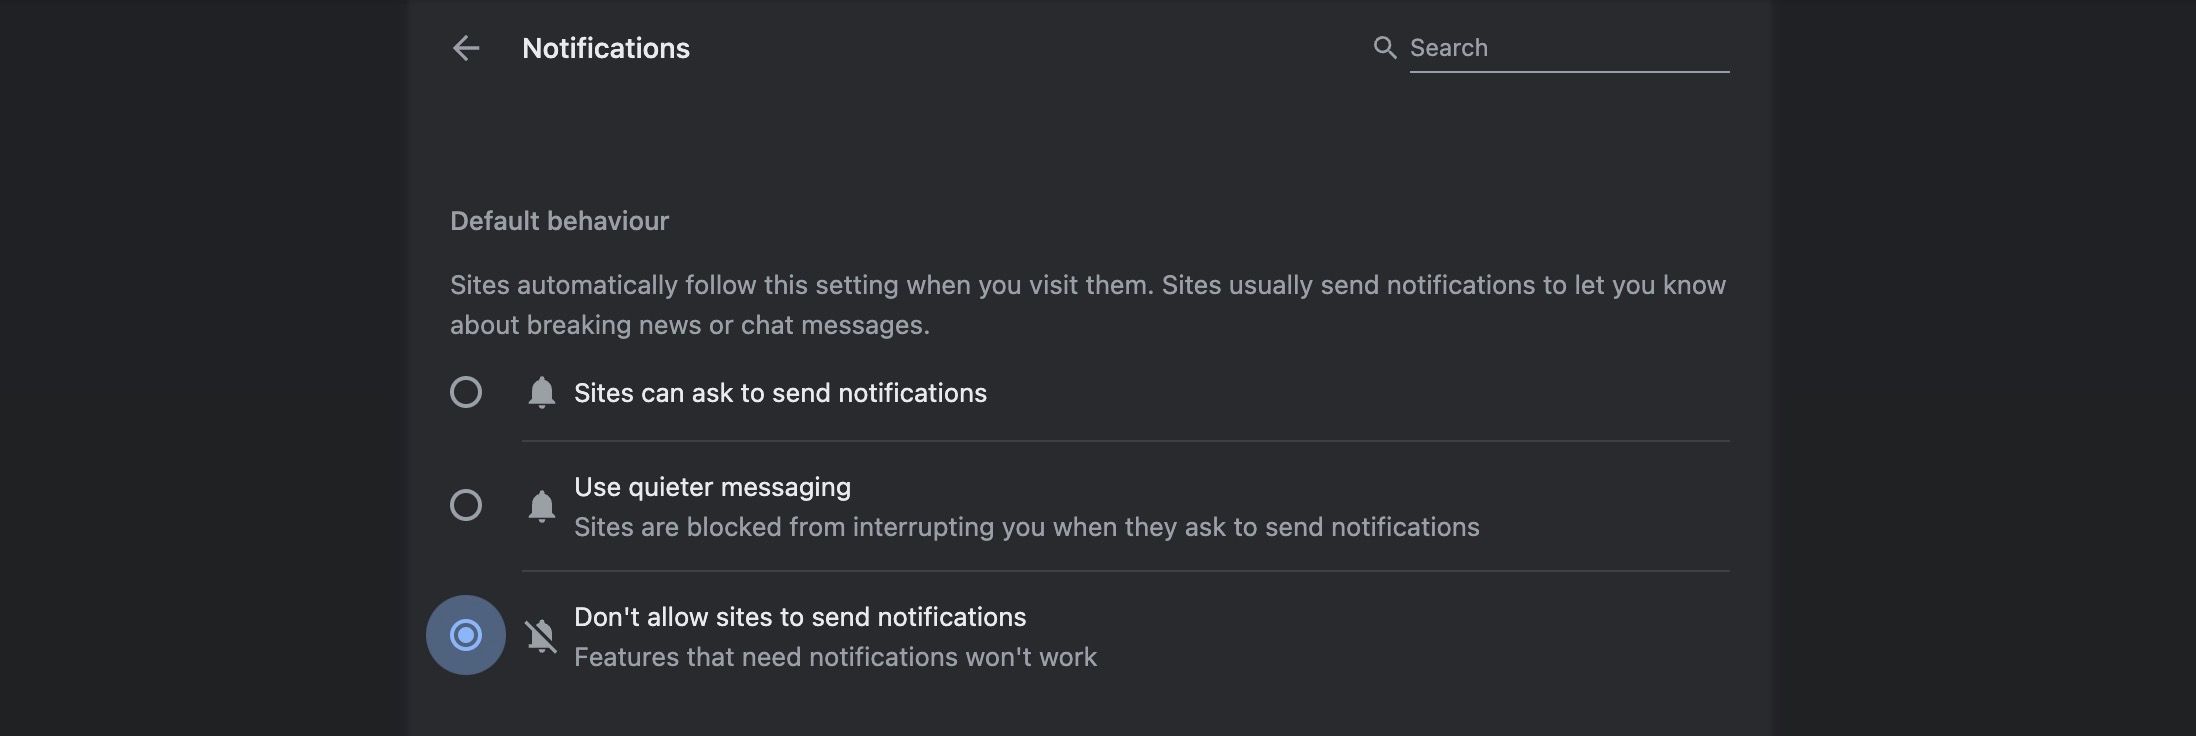 block sites from sending notifications and notification requests in chrome